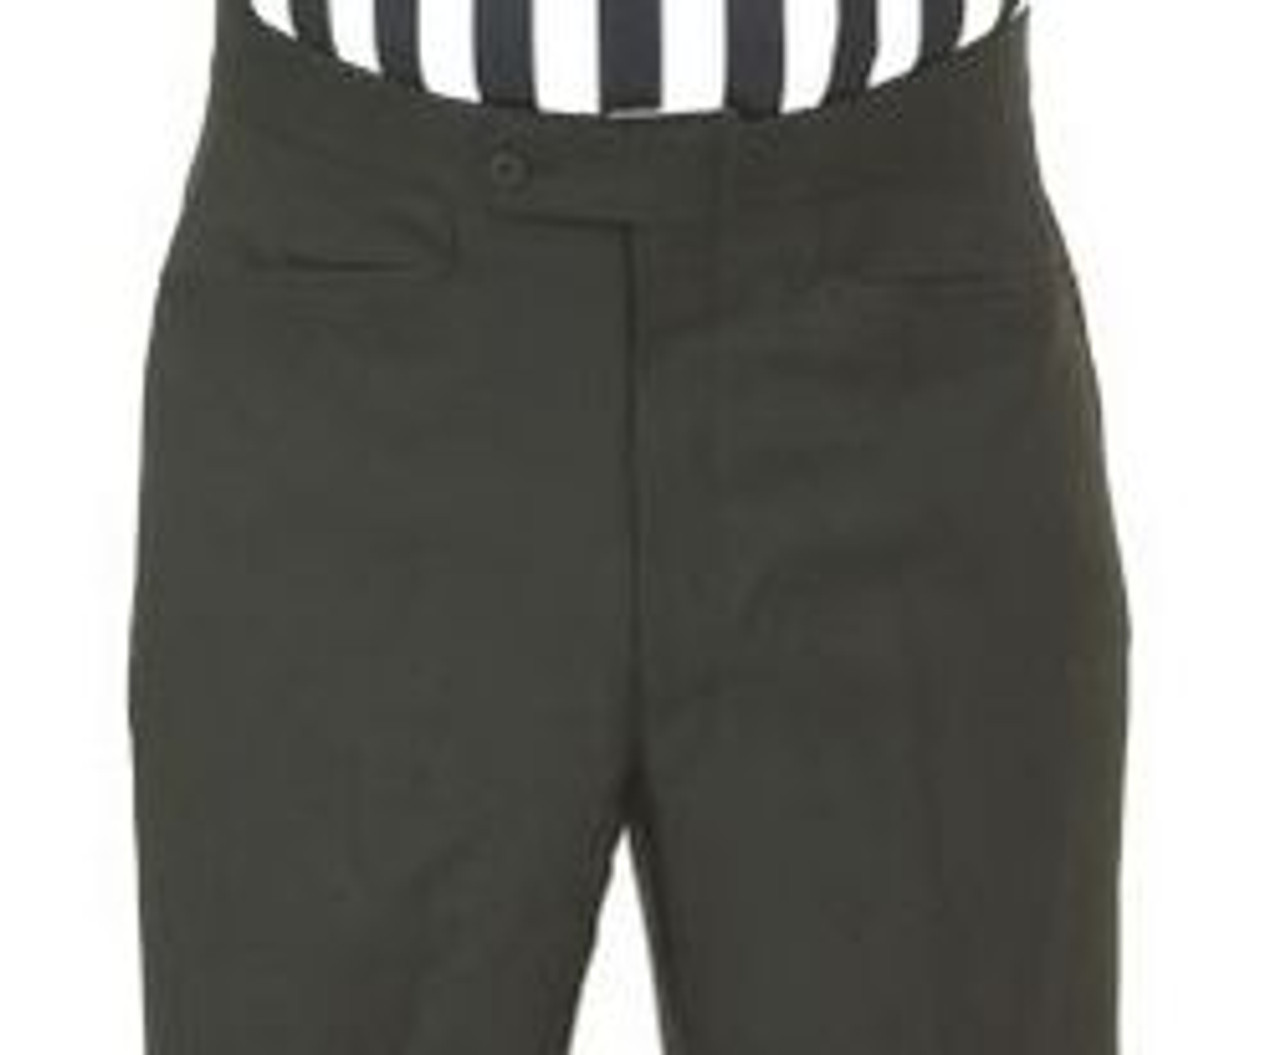 REF Basketball Officials' Pant